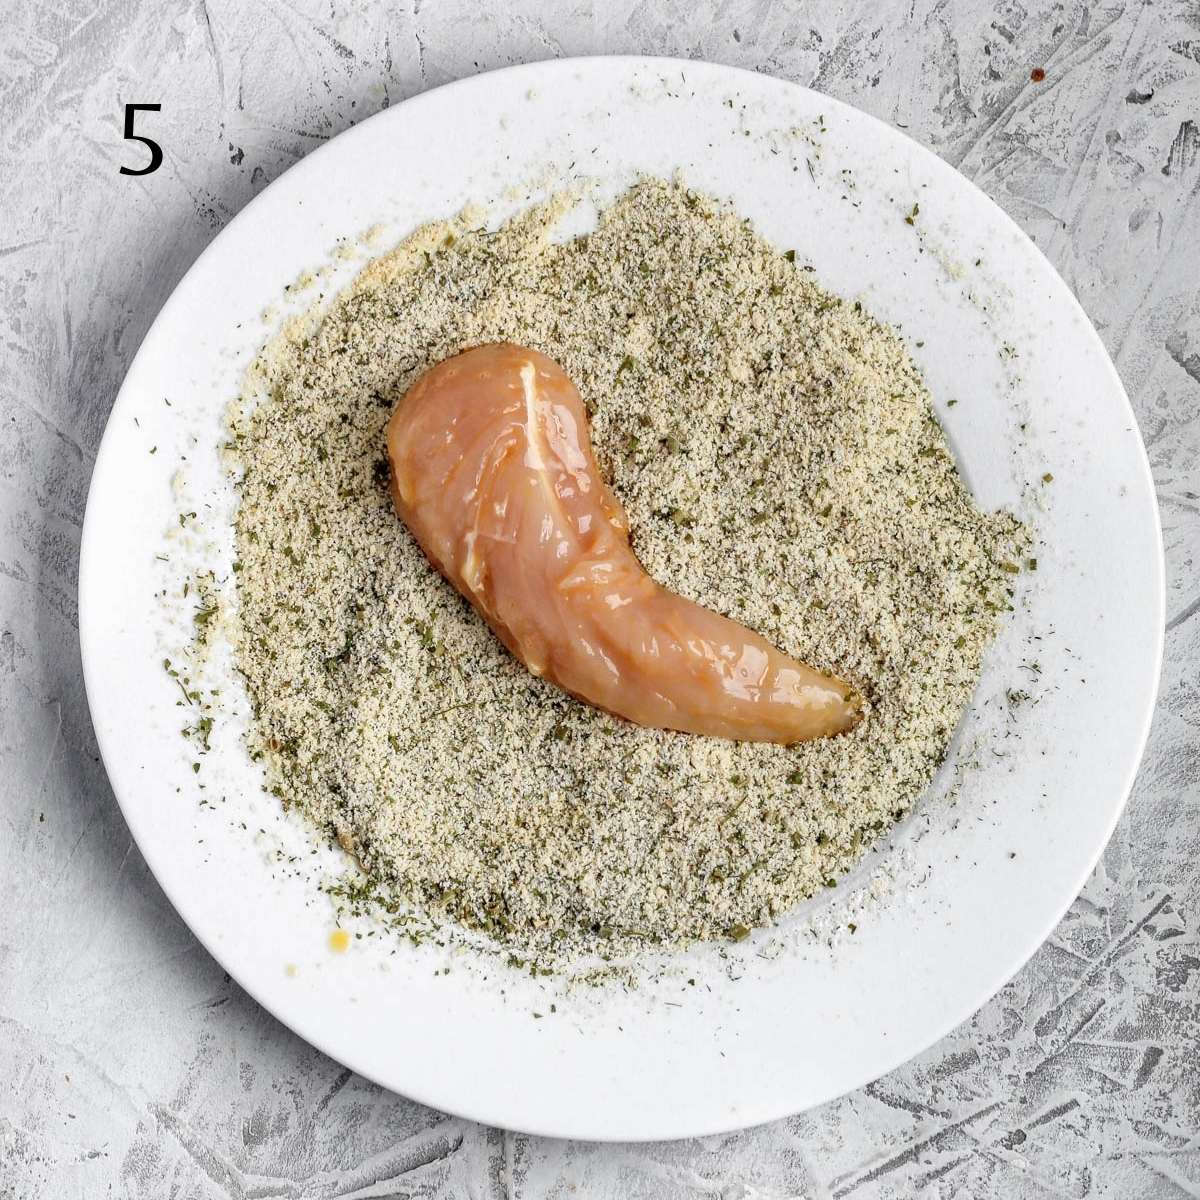 a almond flour mixture on a plate with a chicken tender on top